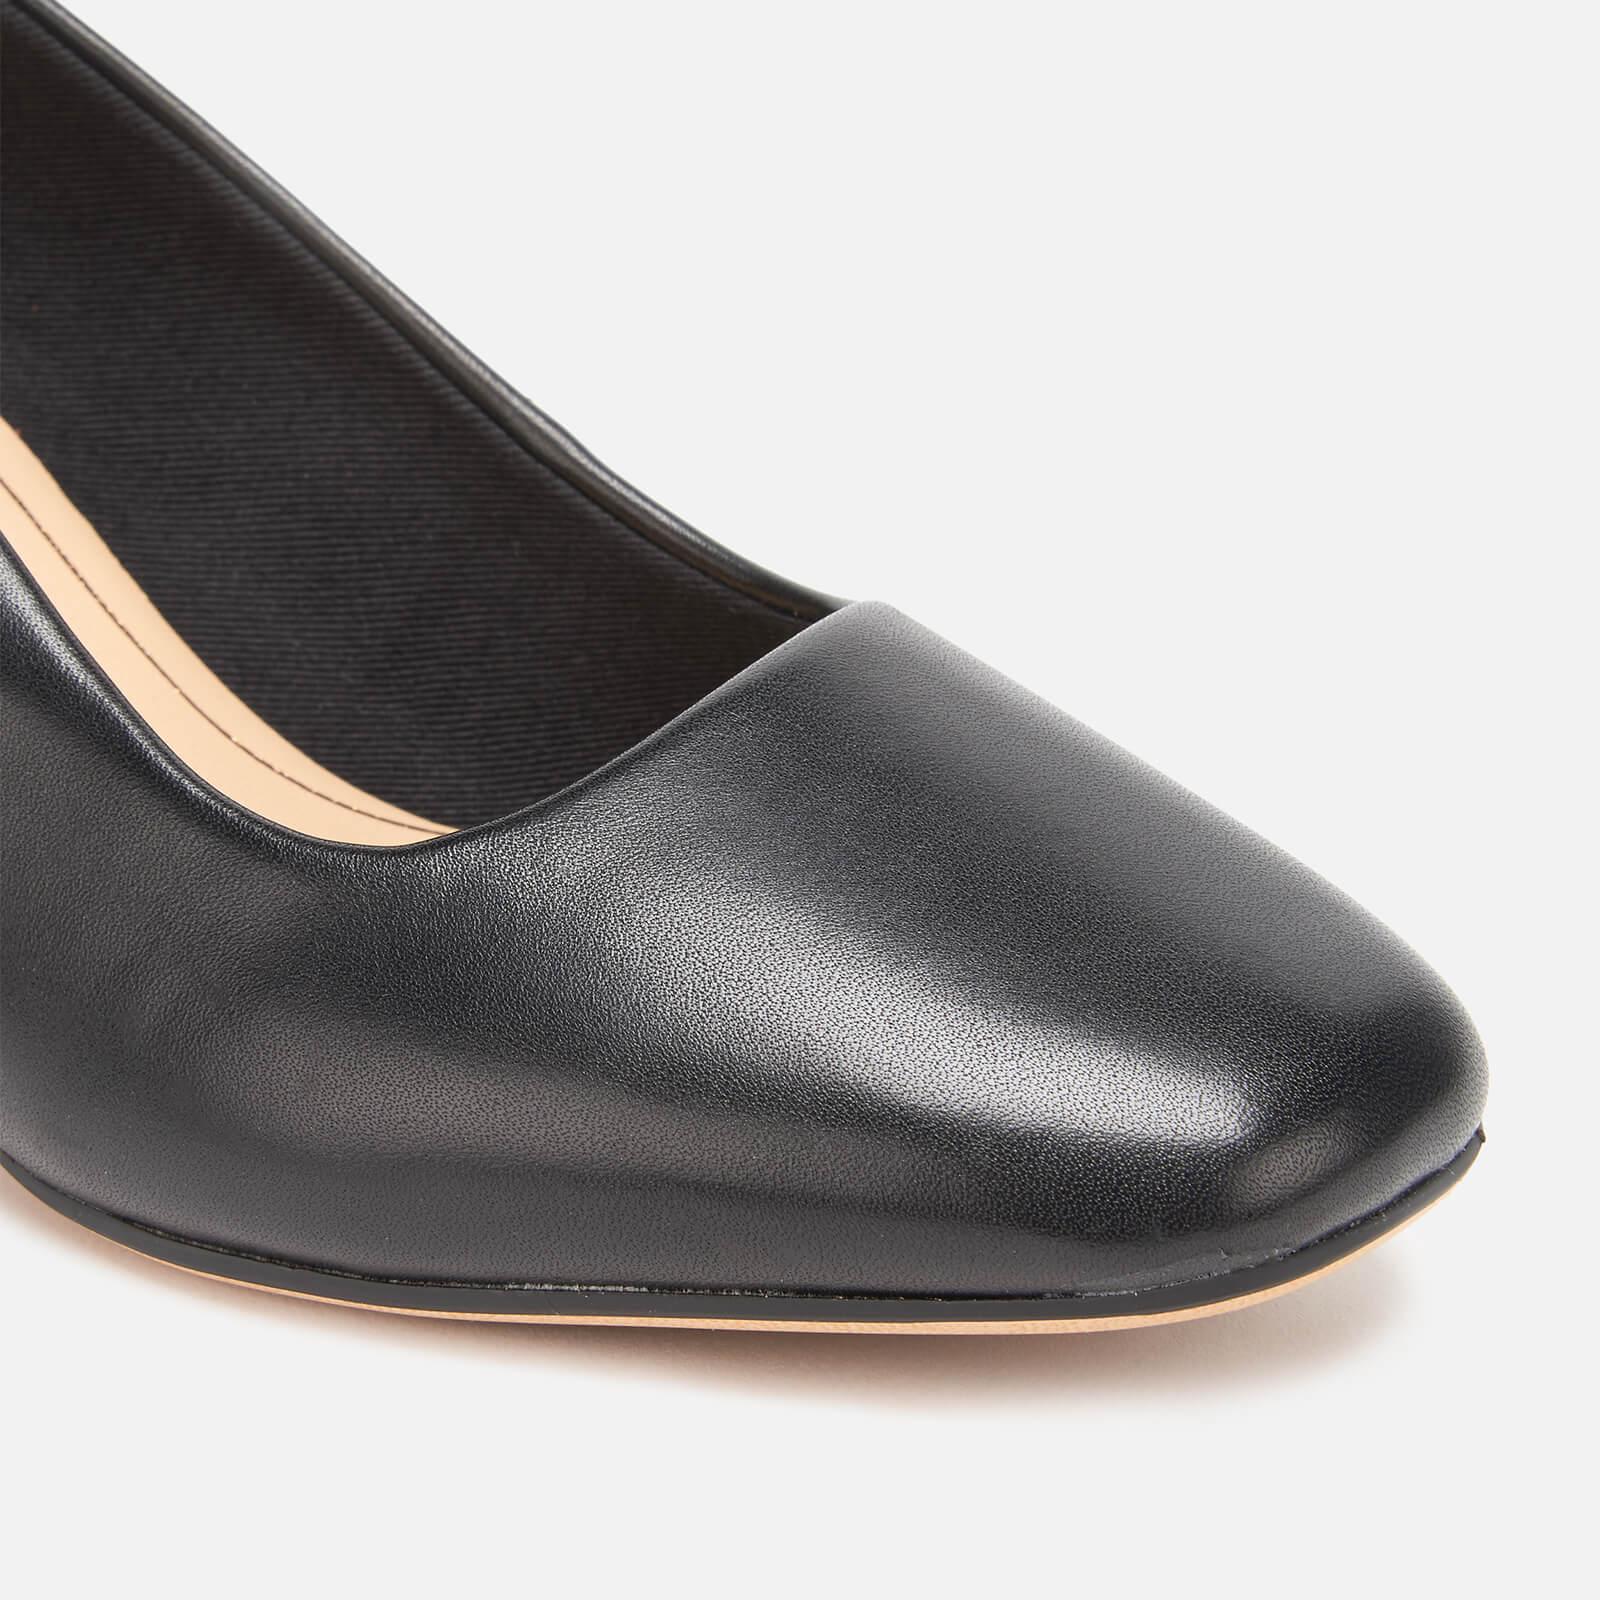 Details about   Ladies Clarks 'Sheer Rose' Black Leather Block Heel Court Shoes